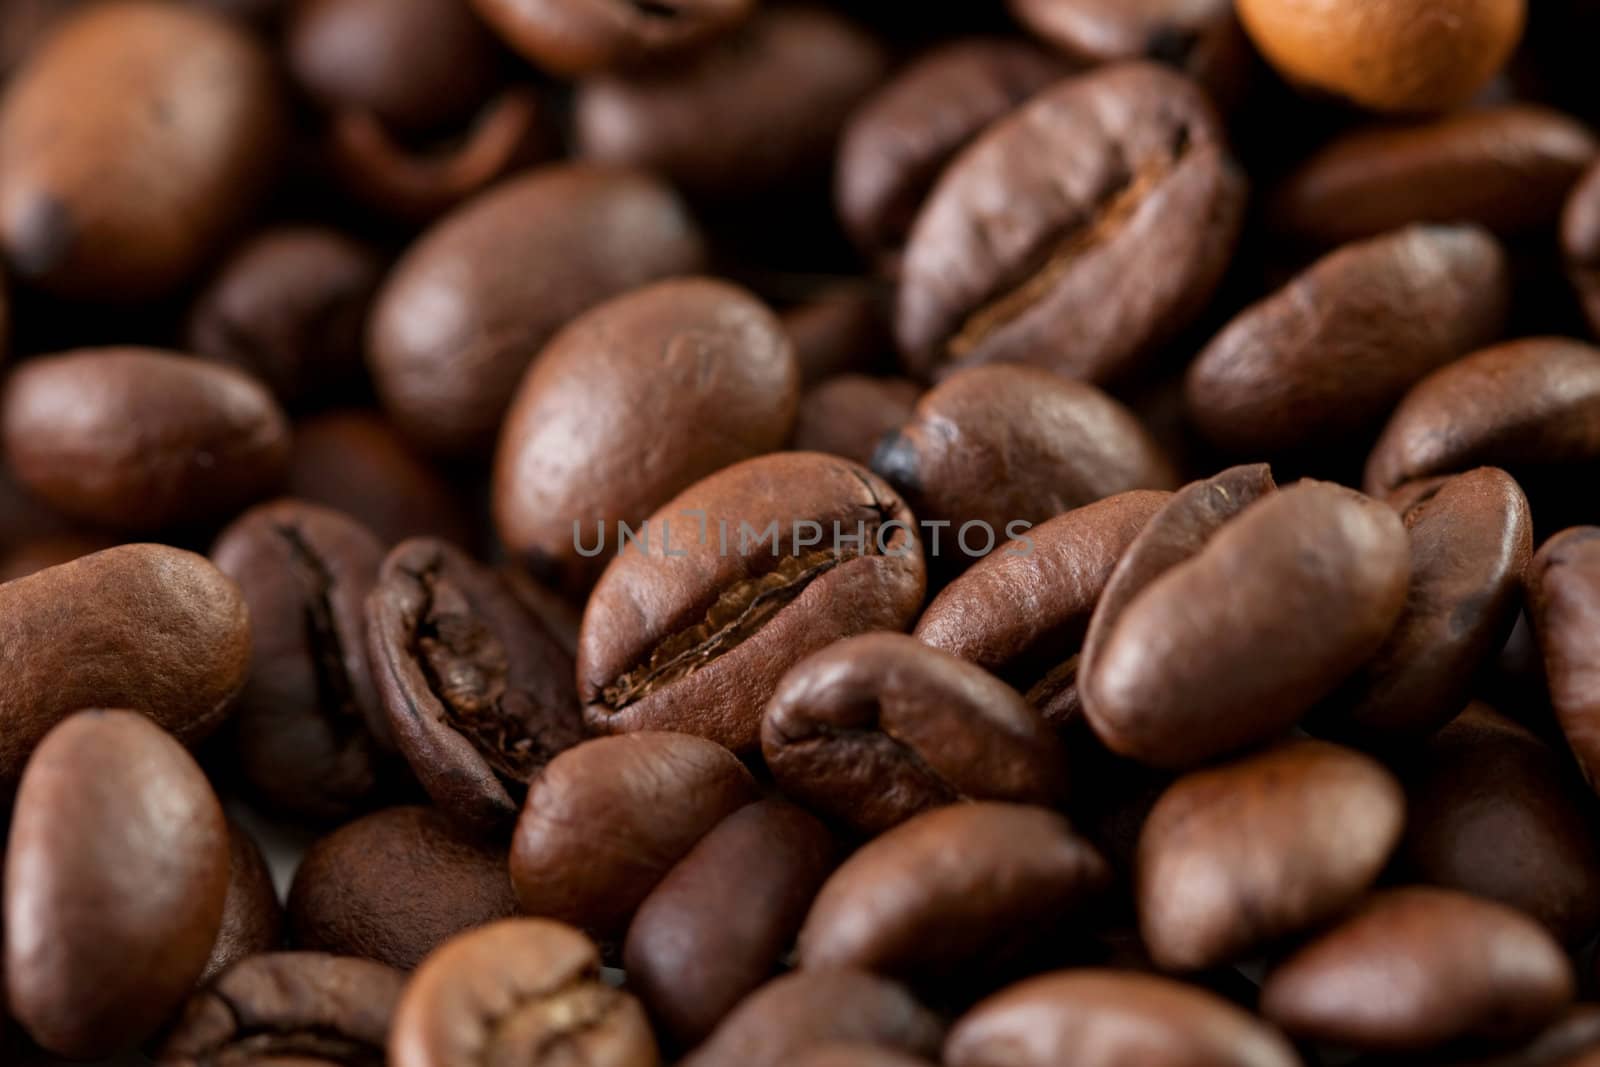 A close up shoot of a bunch of coffee beans